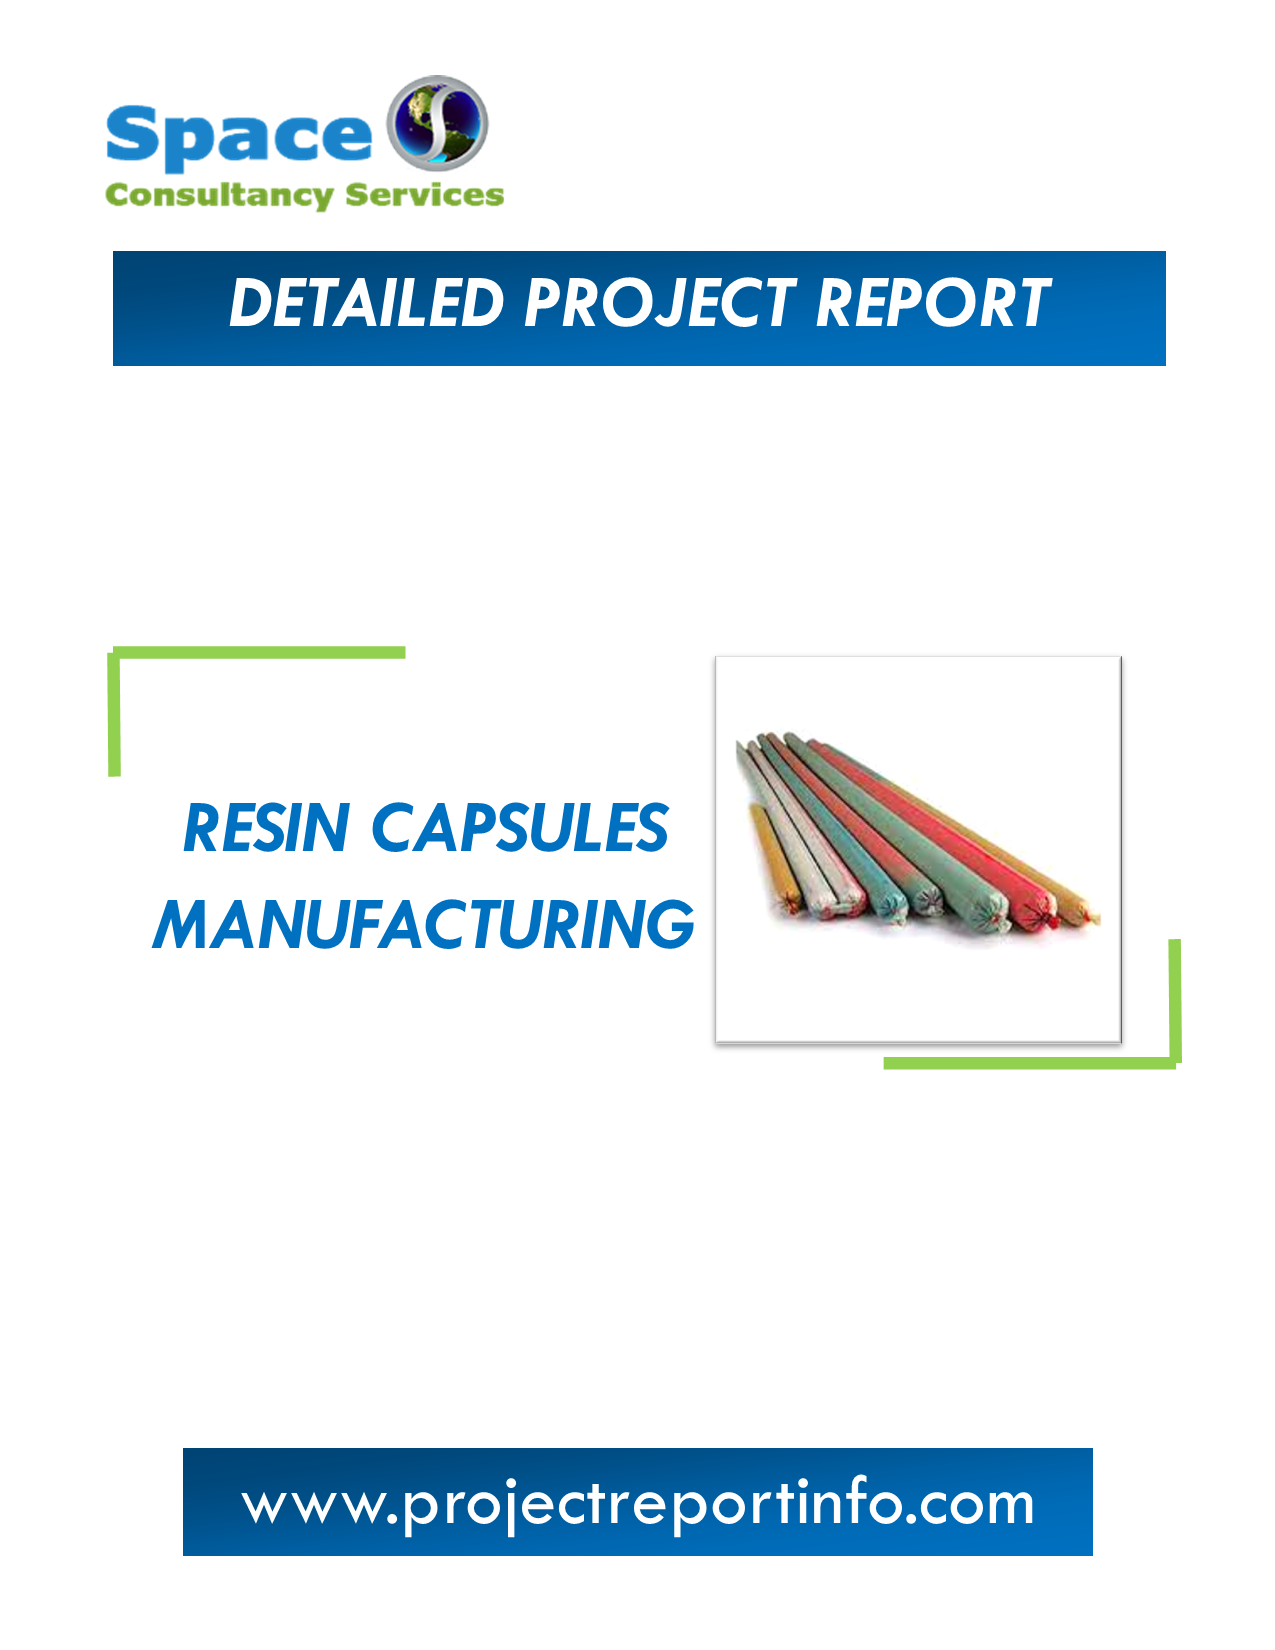 Project Report on Resin Capsules Manufacturing